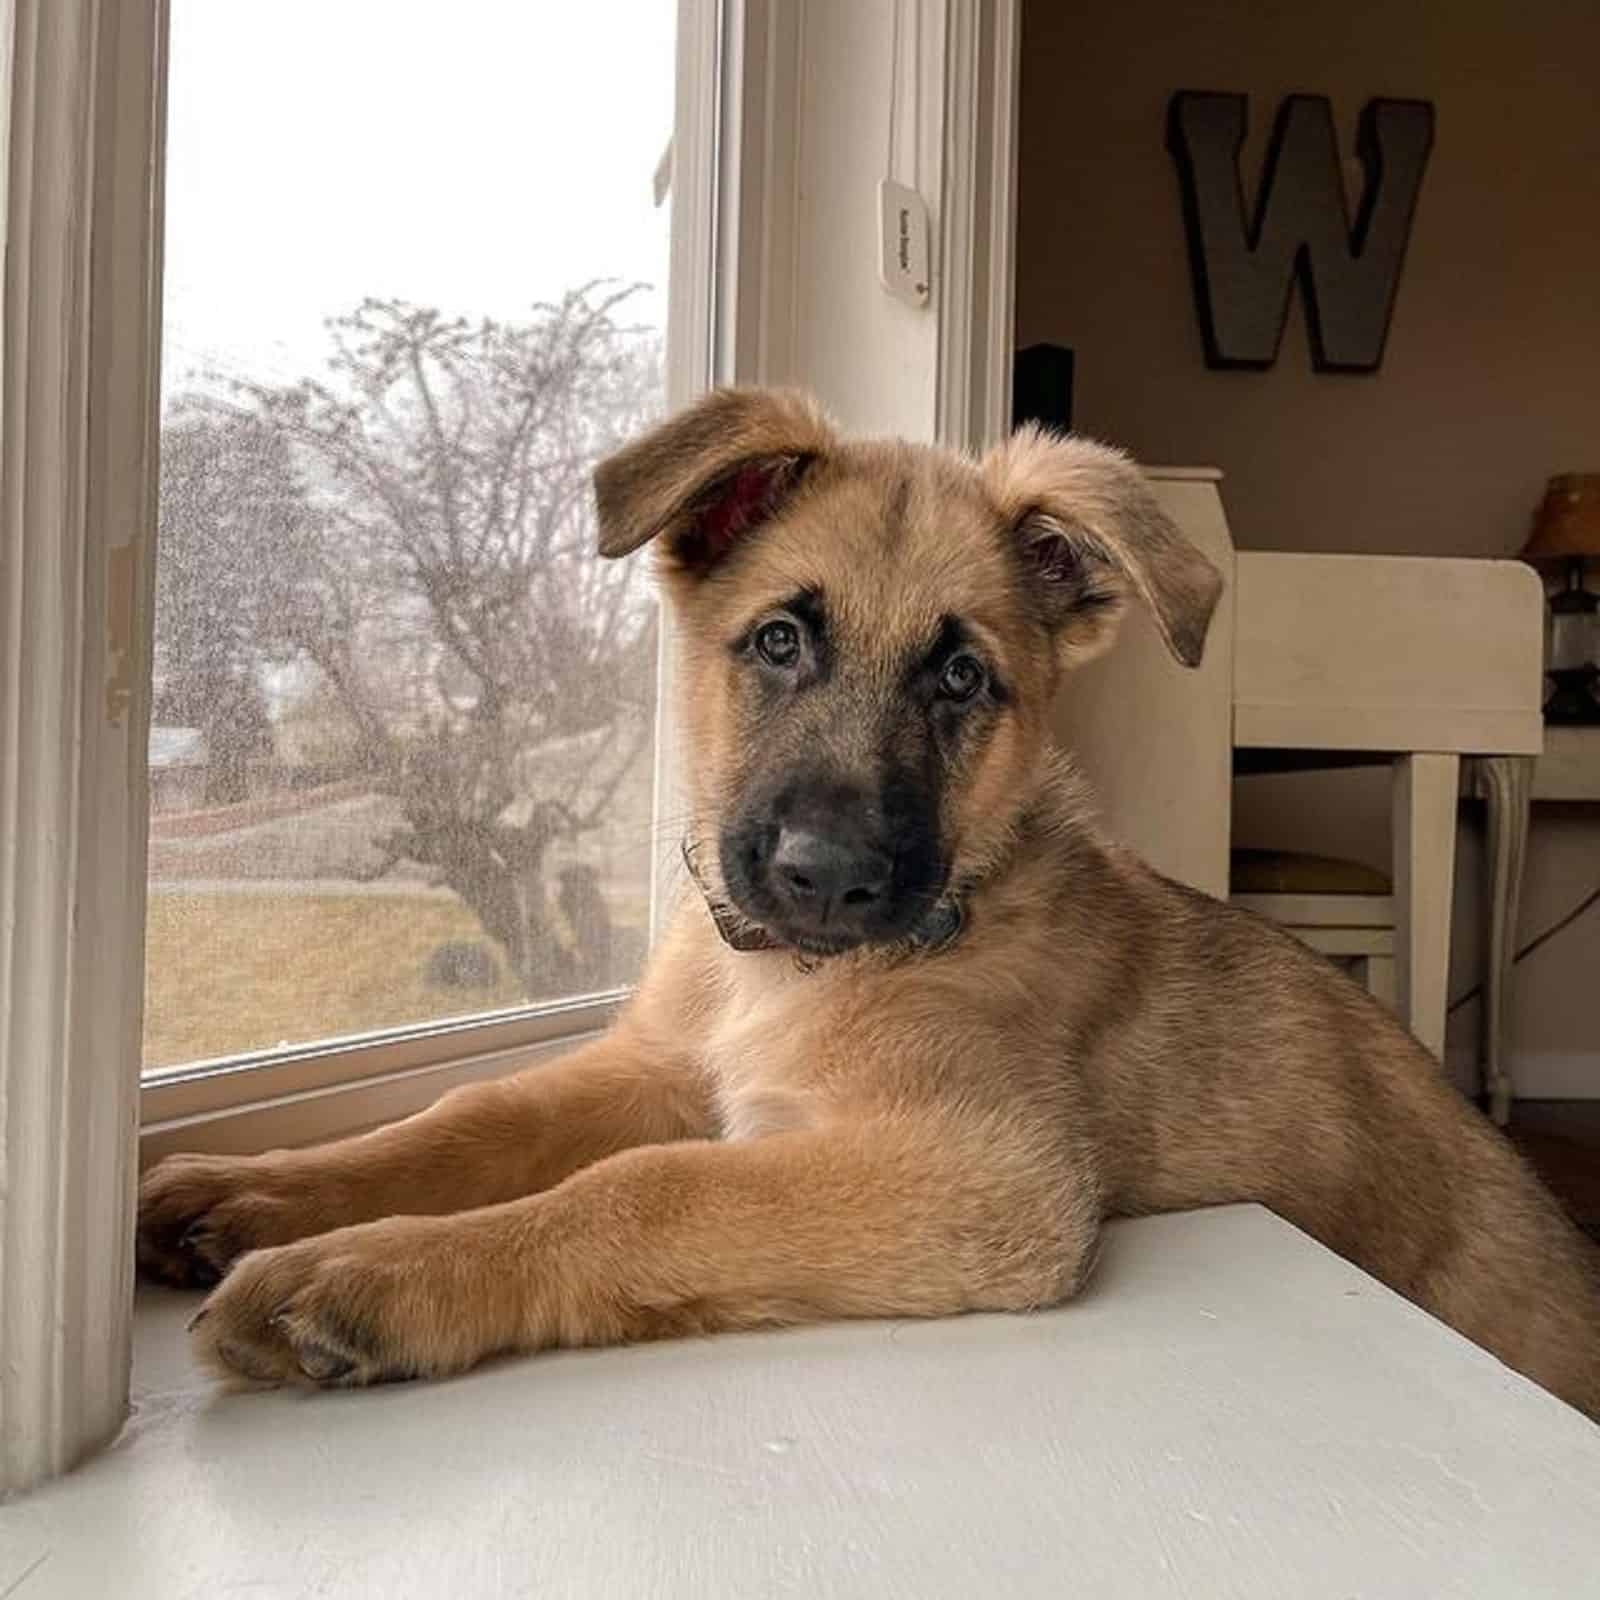 gsd puppy leaning on window sill